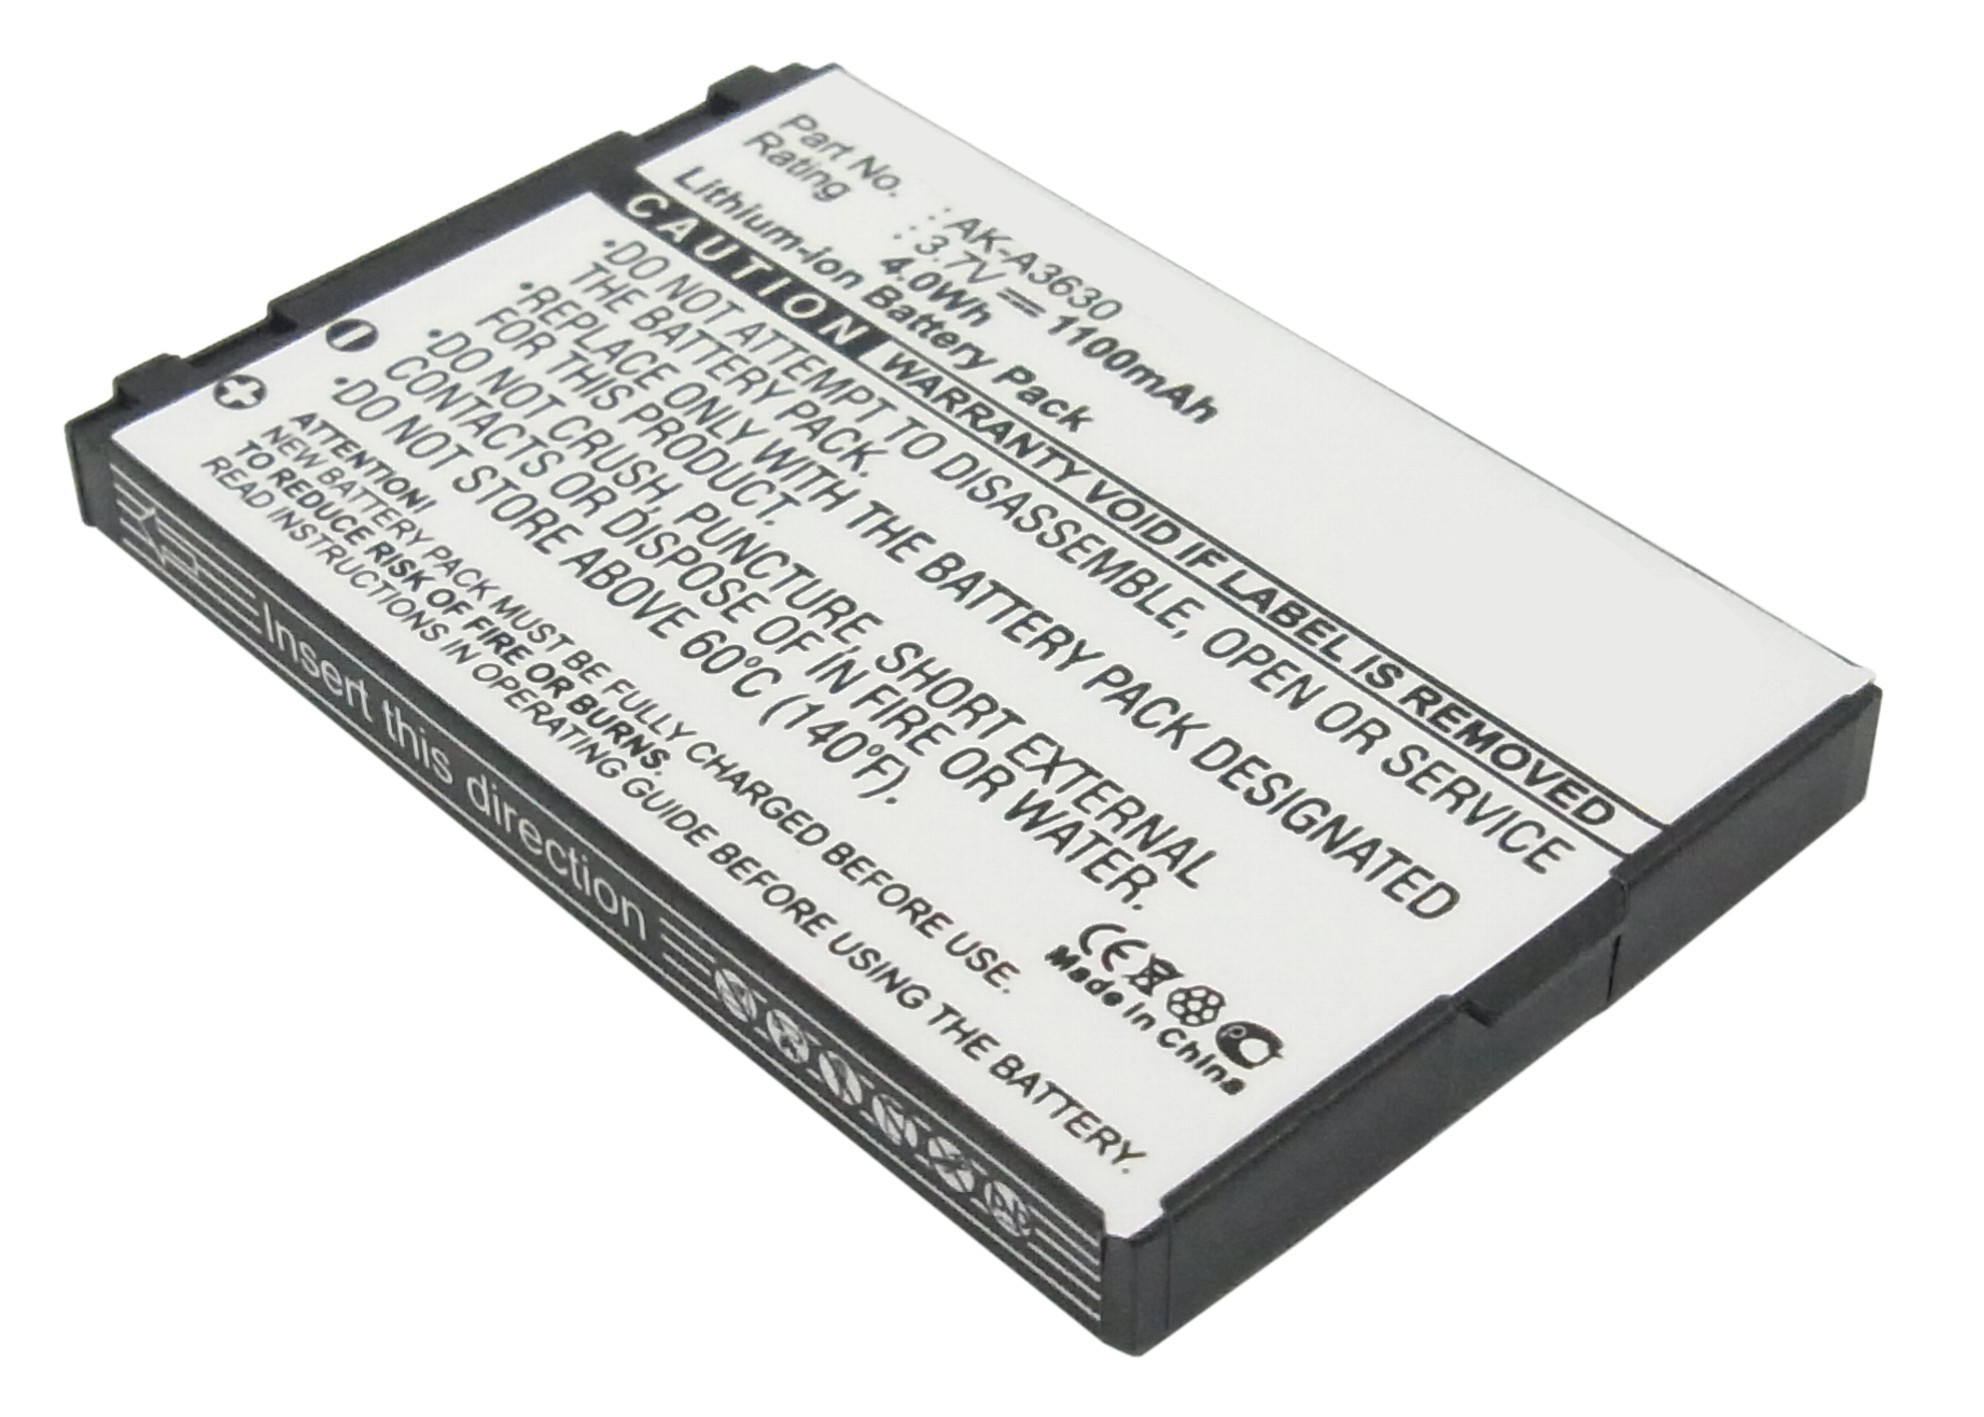 Synergy Digital Cell Phone Battery, Compatible with Emporia AK-A3630 Cell Phone Battery (3.7V, Li-ion, 1100mAh)